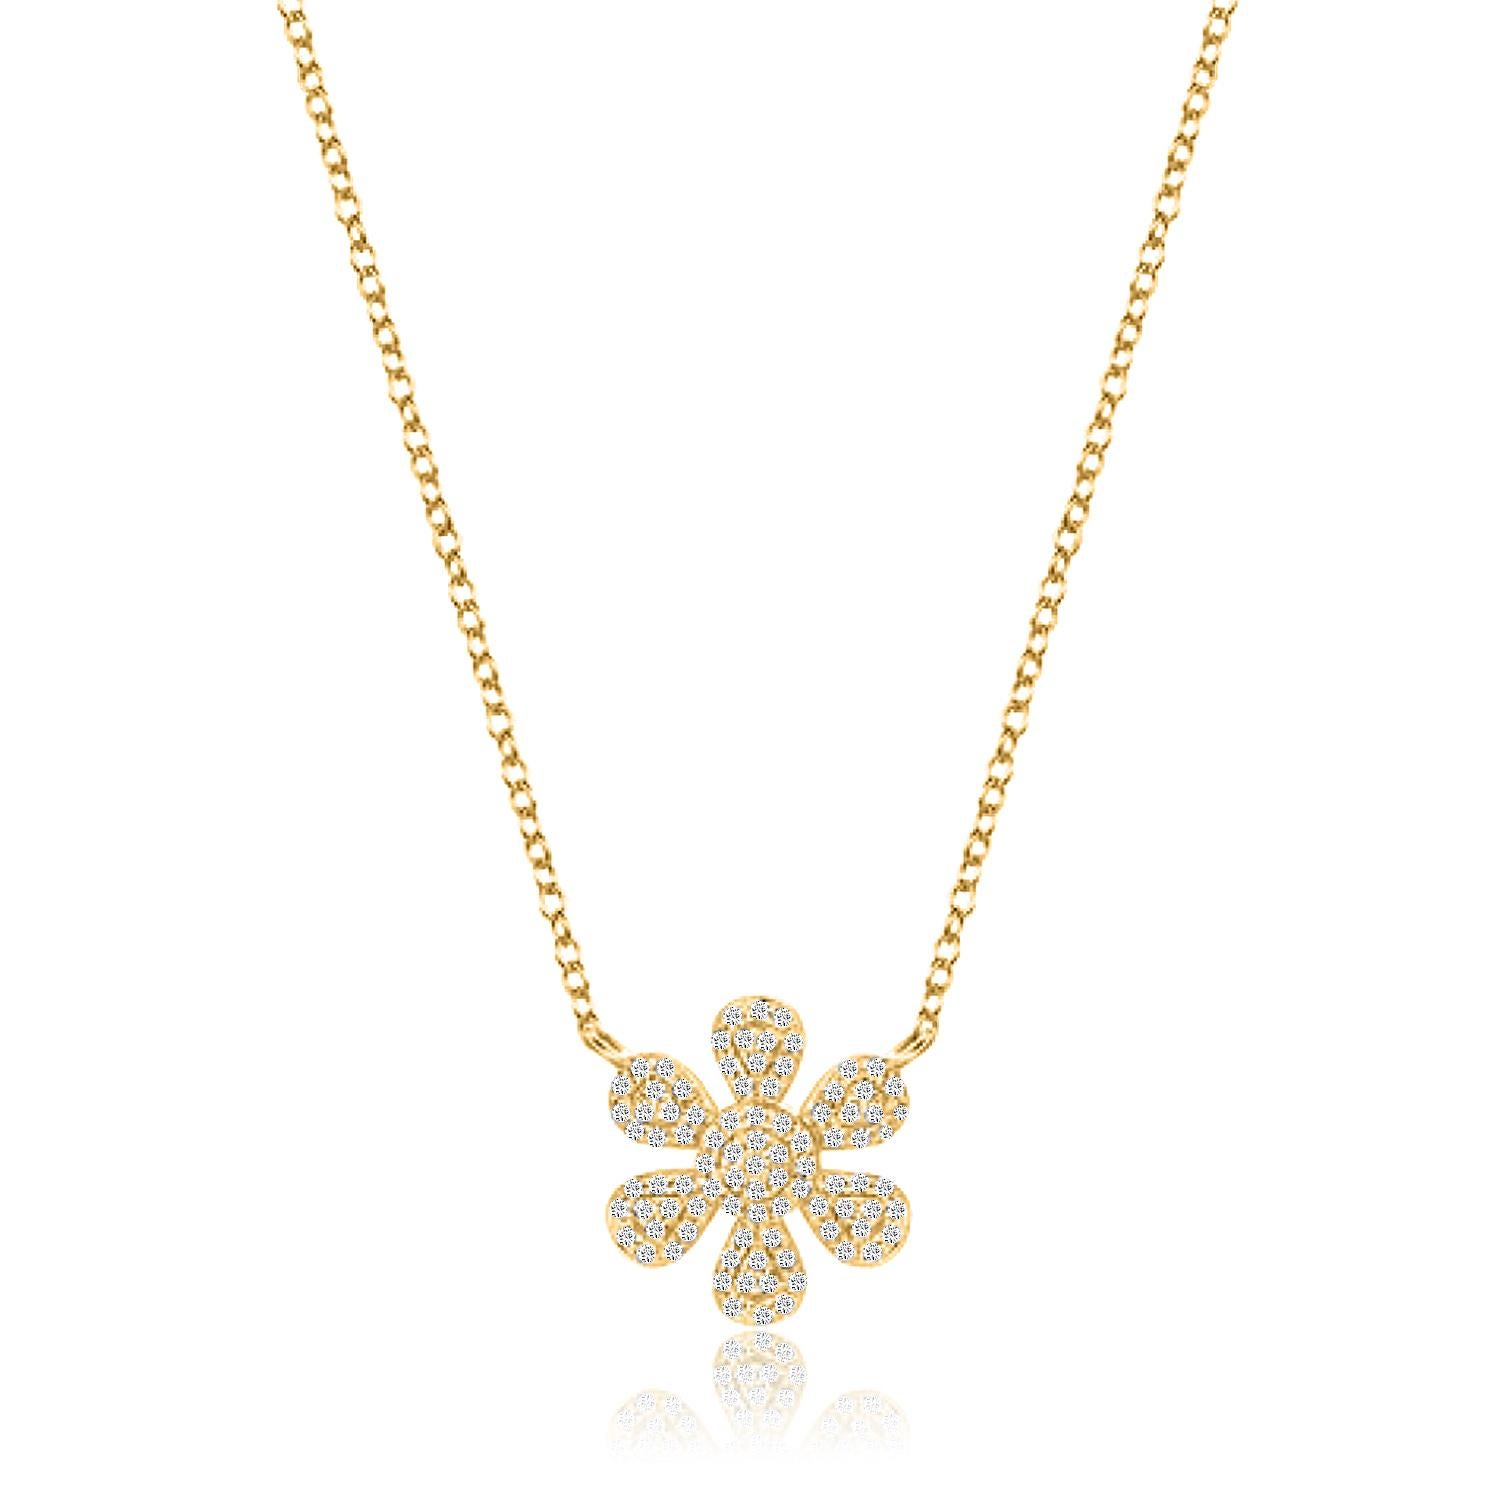 14K DIAMOND DAISY FLOWER Diamond Necklace

Necklace Information
Diamond Type : Natural Diamond
Metal : 14k Gold
Metal Color : Rose Gold, Yellow Gold, White Gold
Total Carat Weight : 0.27 ttcw
Diamond colour-clarity : G/H Color VS/Si1 Clarity
